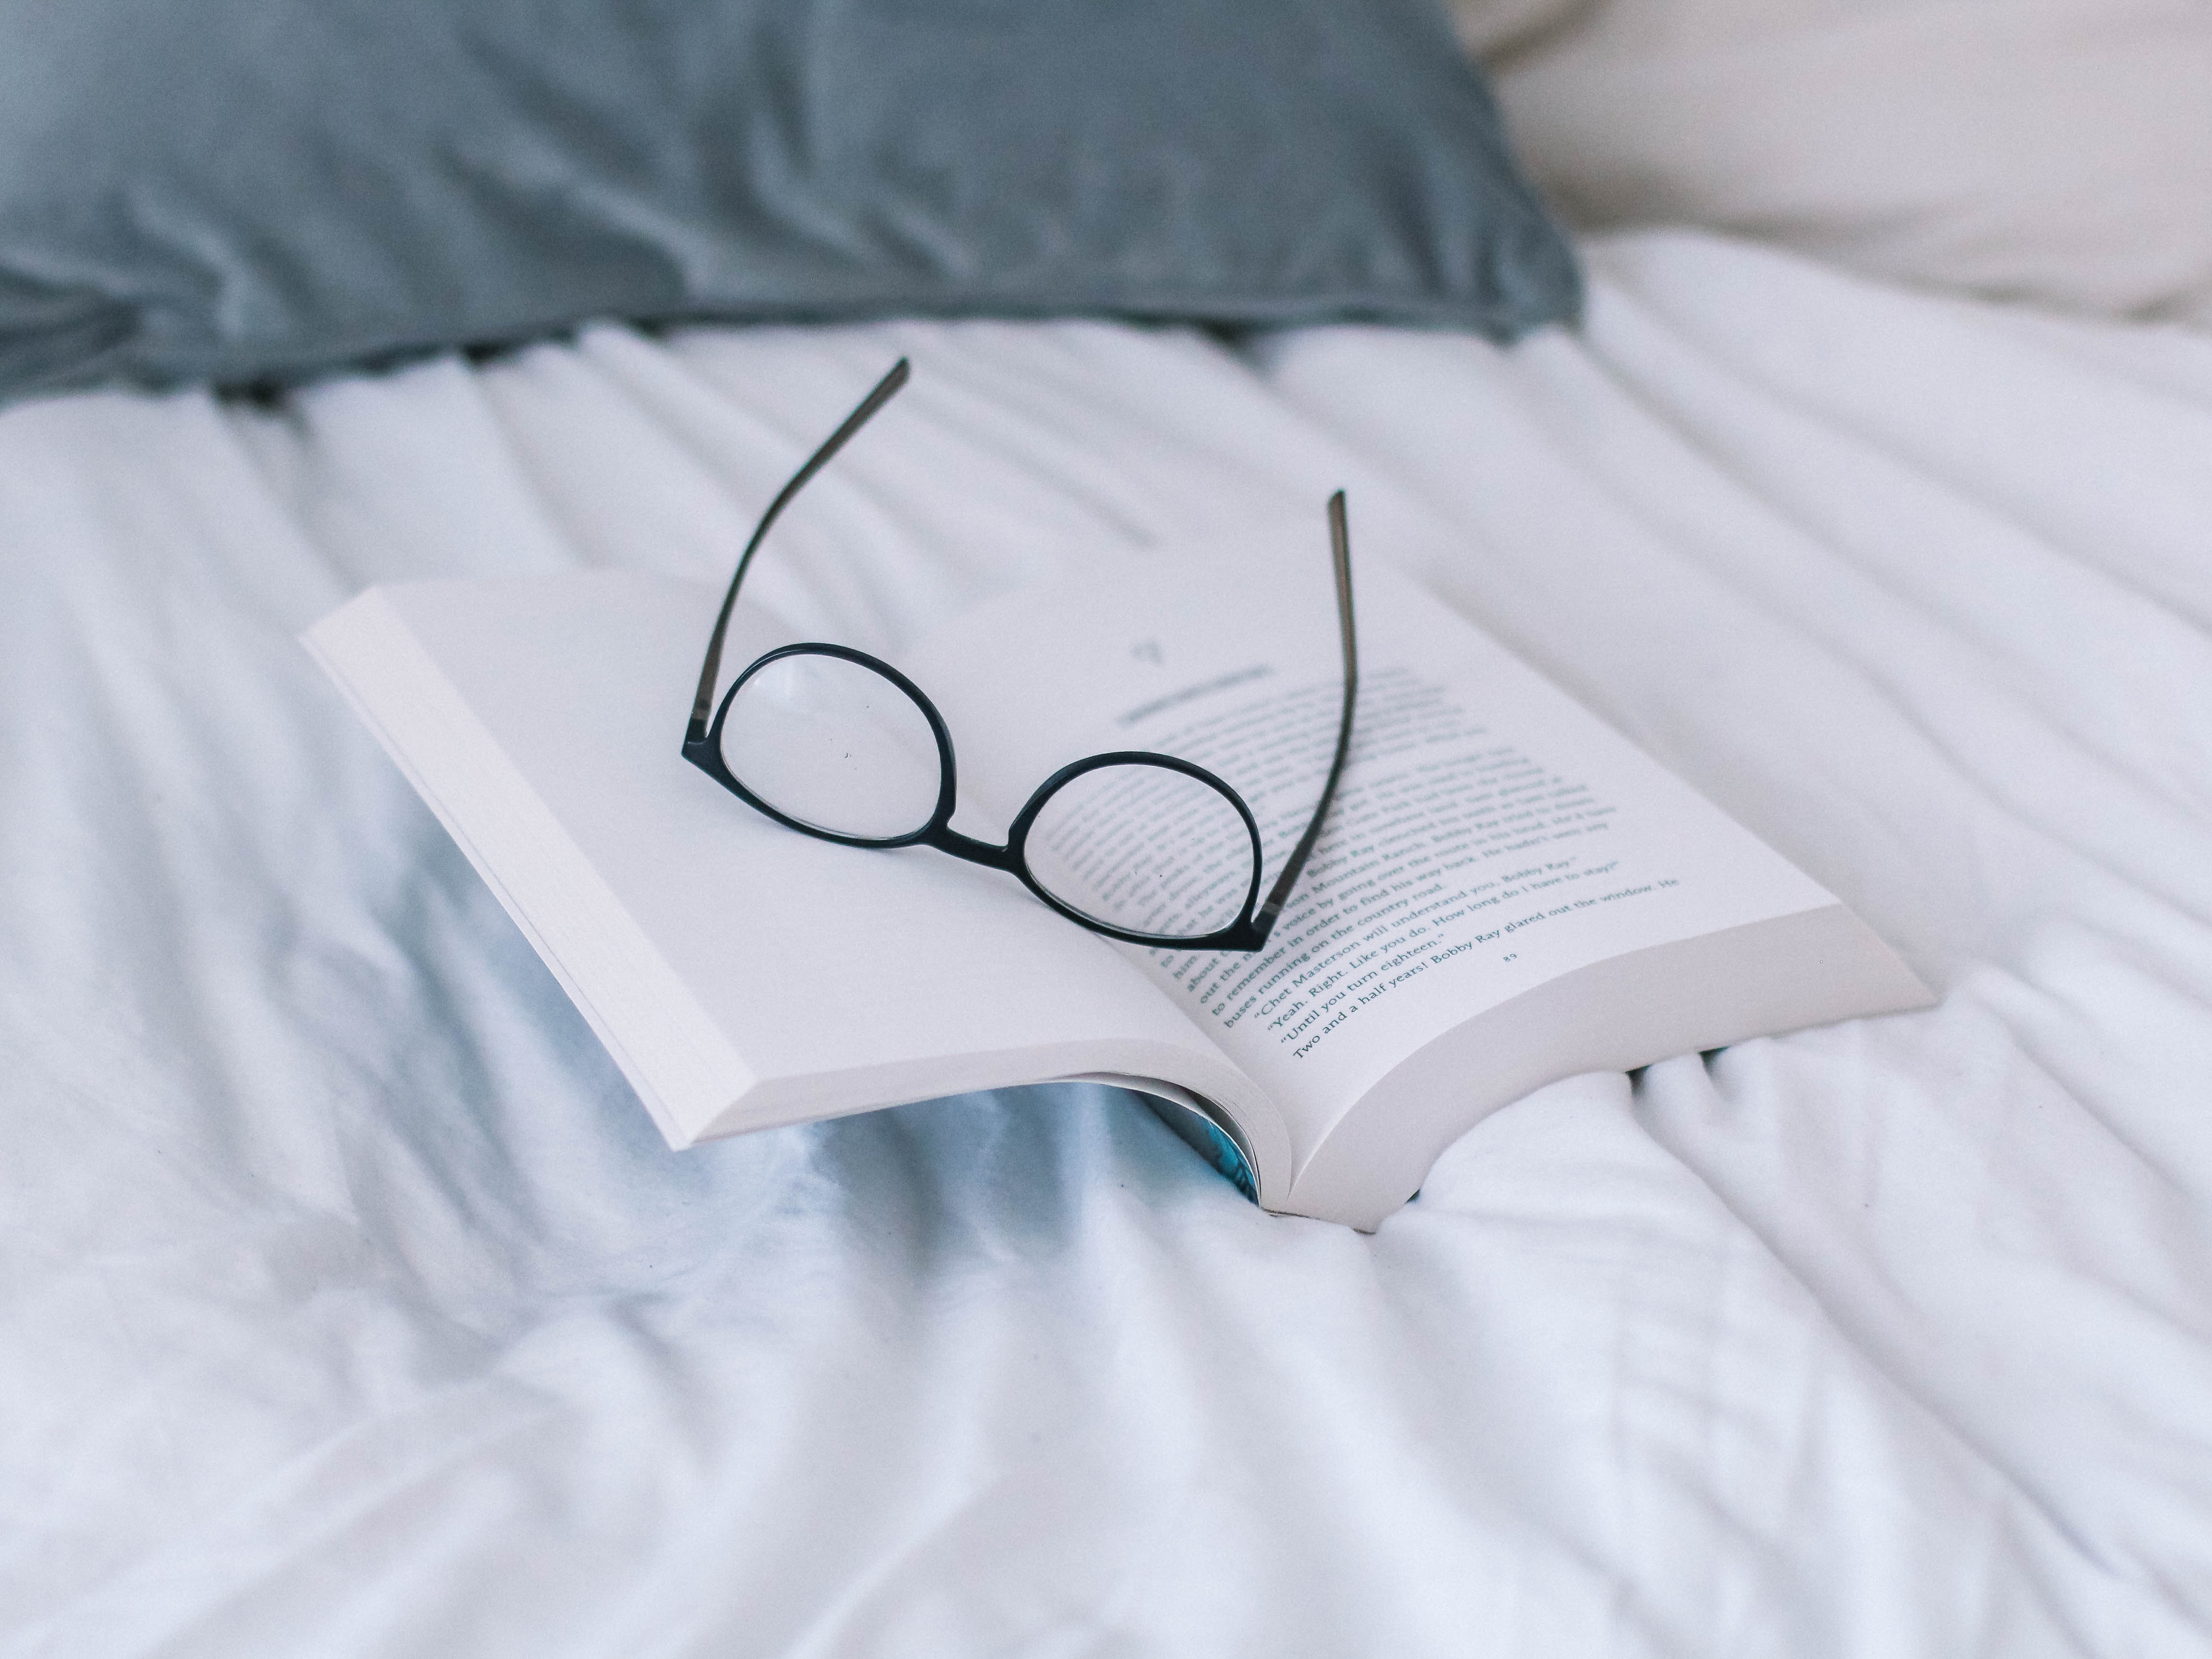 Book open on a bed with a pair of eye glasses keeping the book open